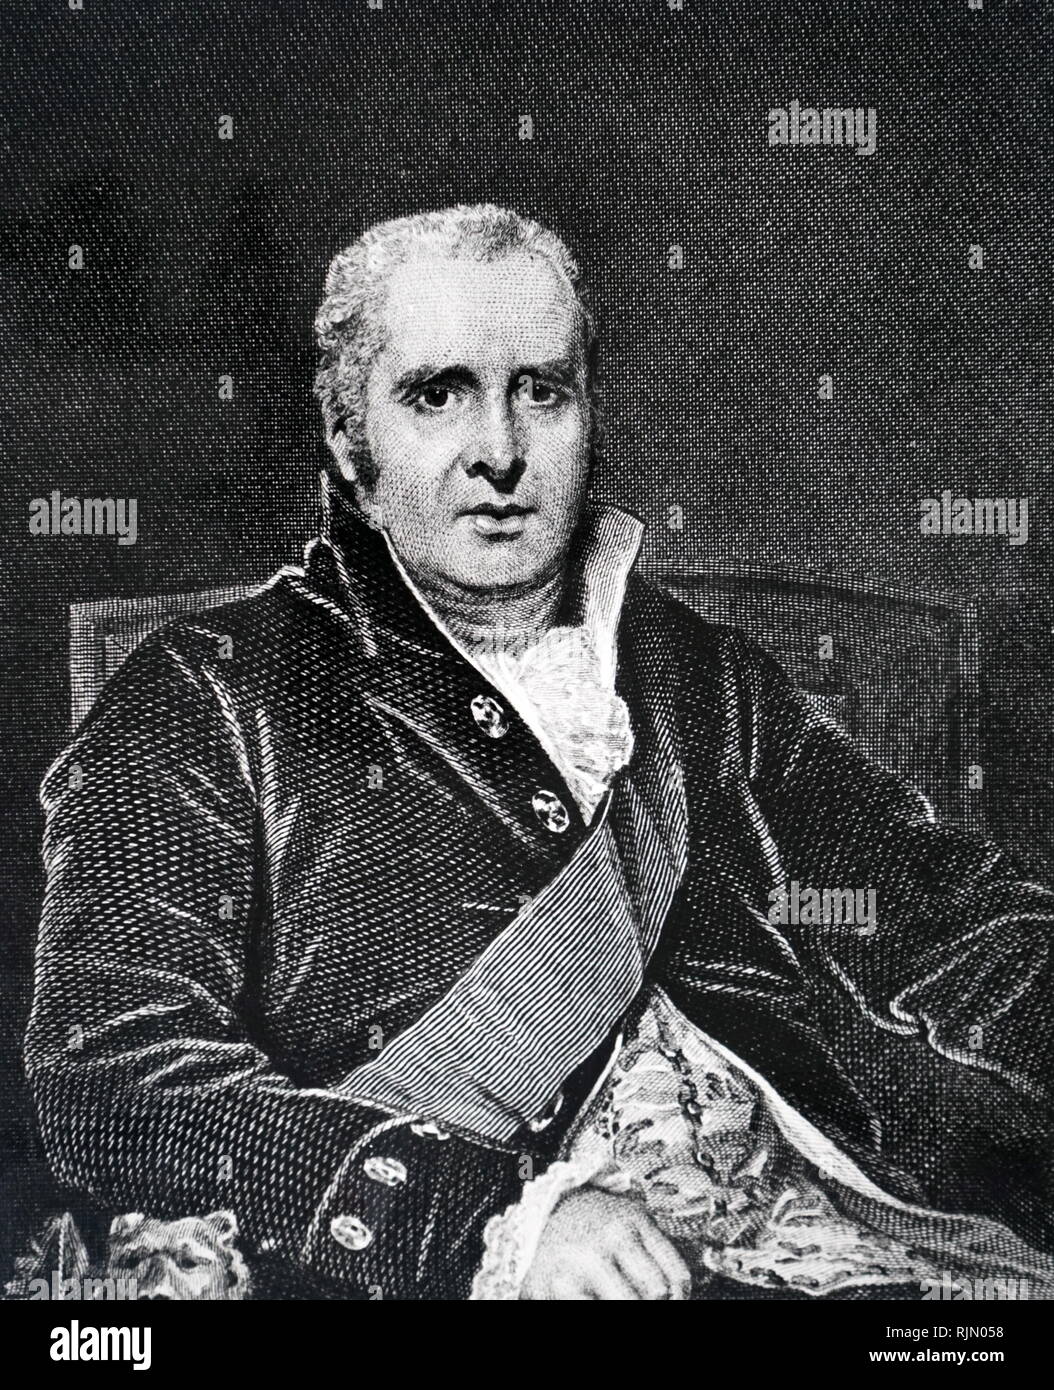 George Legge, third Earl of Dartmouth, (1755-1810). Vice-President of the Society for the Encouragement of Arts, Manufactures and Commerce. 1813 Stock Photo